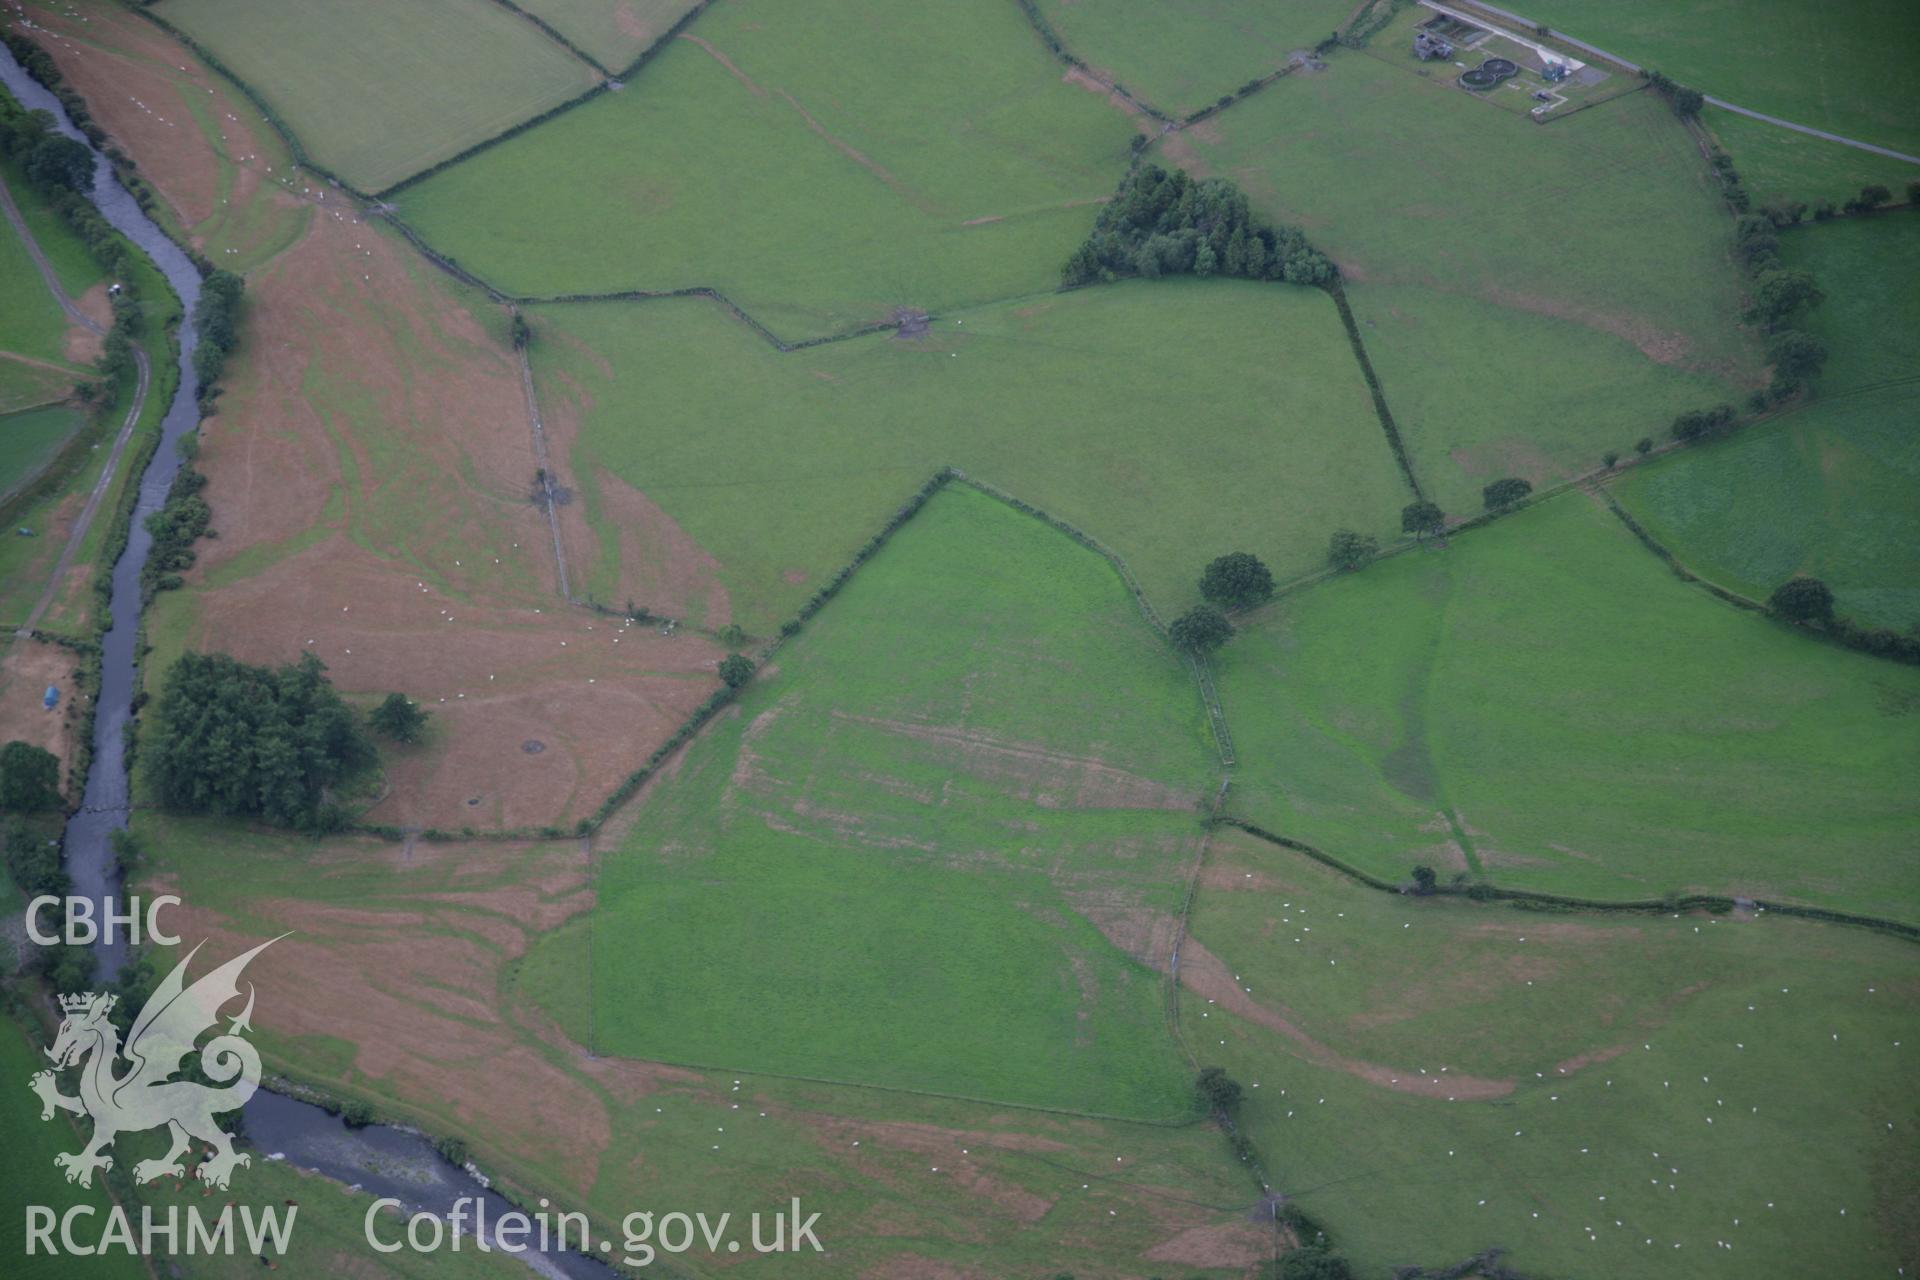 RCAHMW colour oblique aerial photograph of parchmarks west of Dolfawr. Taken on 31 July 2006 by Toby Driver.